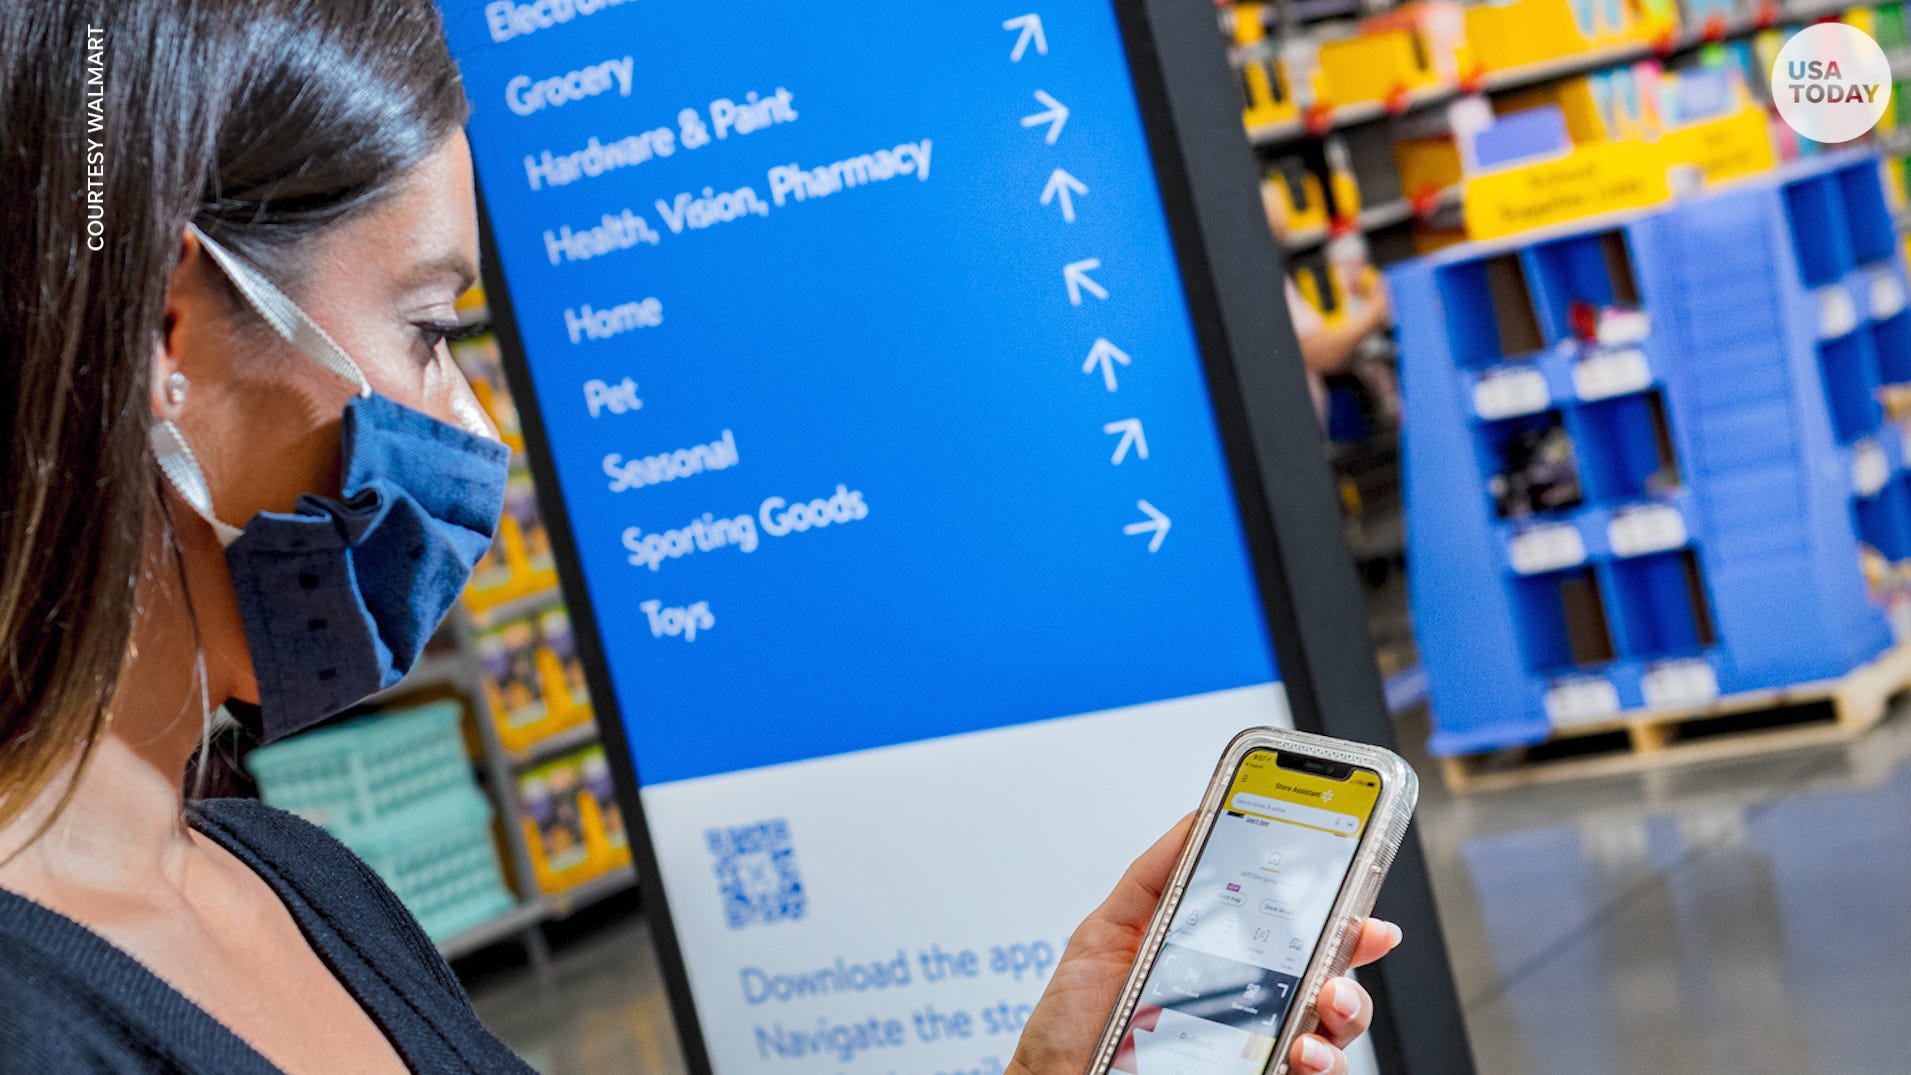 Walmart unveils new store design with selfcheckout kiosks